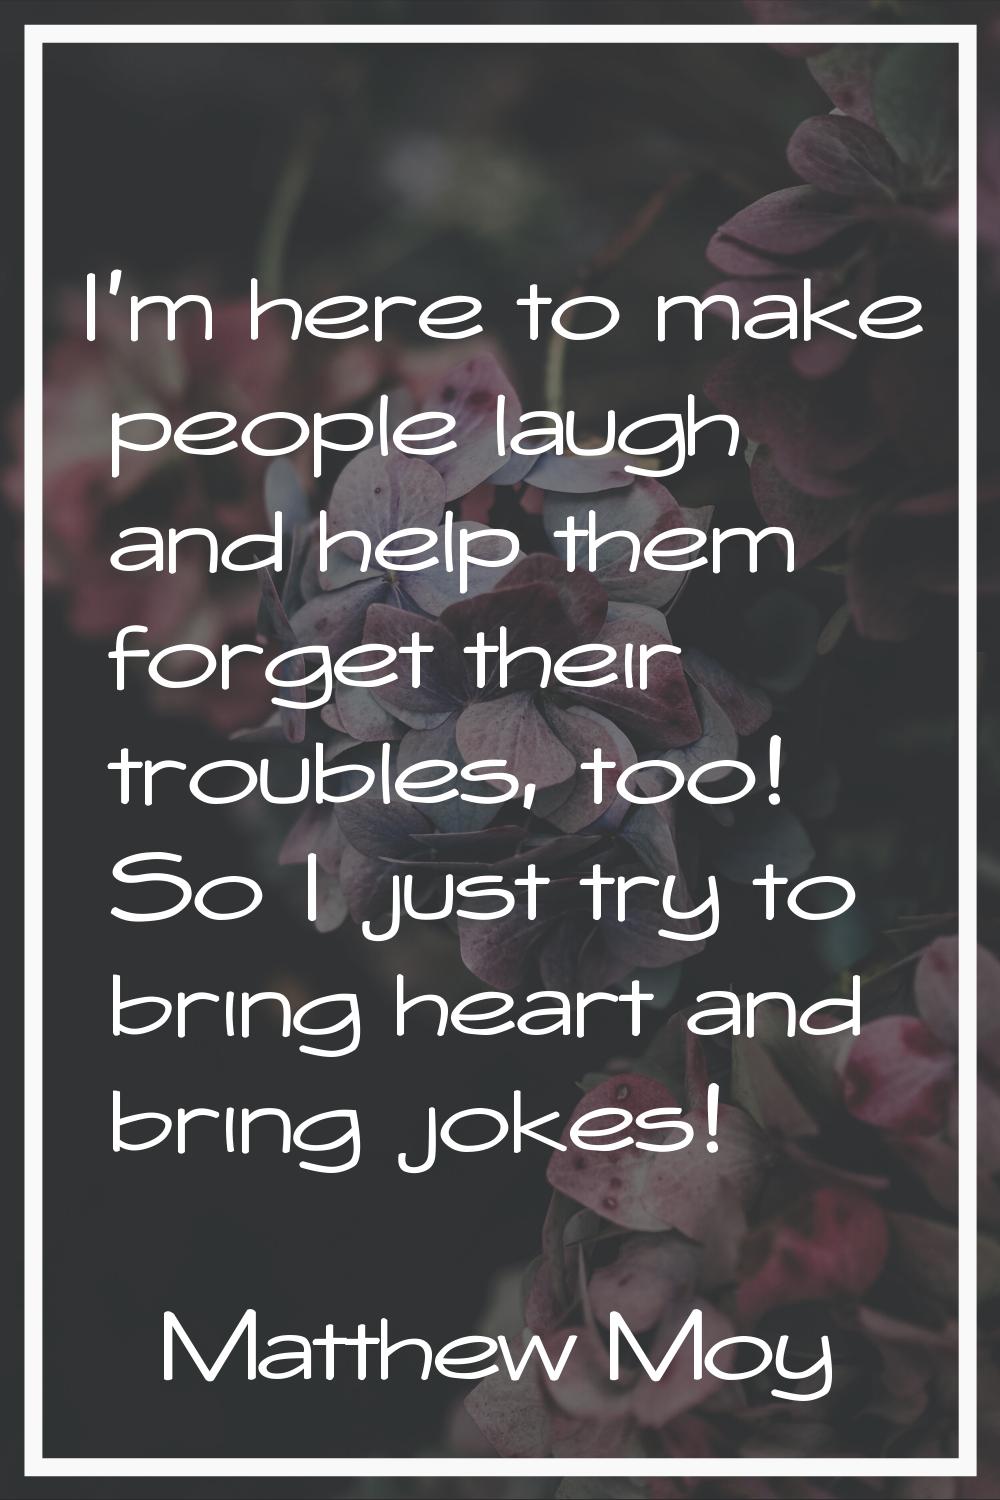 I'm here to make people laugh and help them forget their troubles, too! So I just try to bring hear